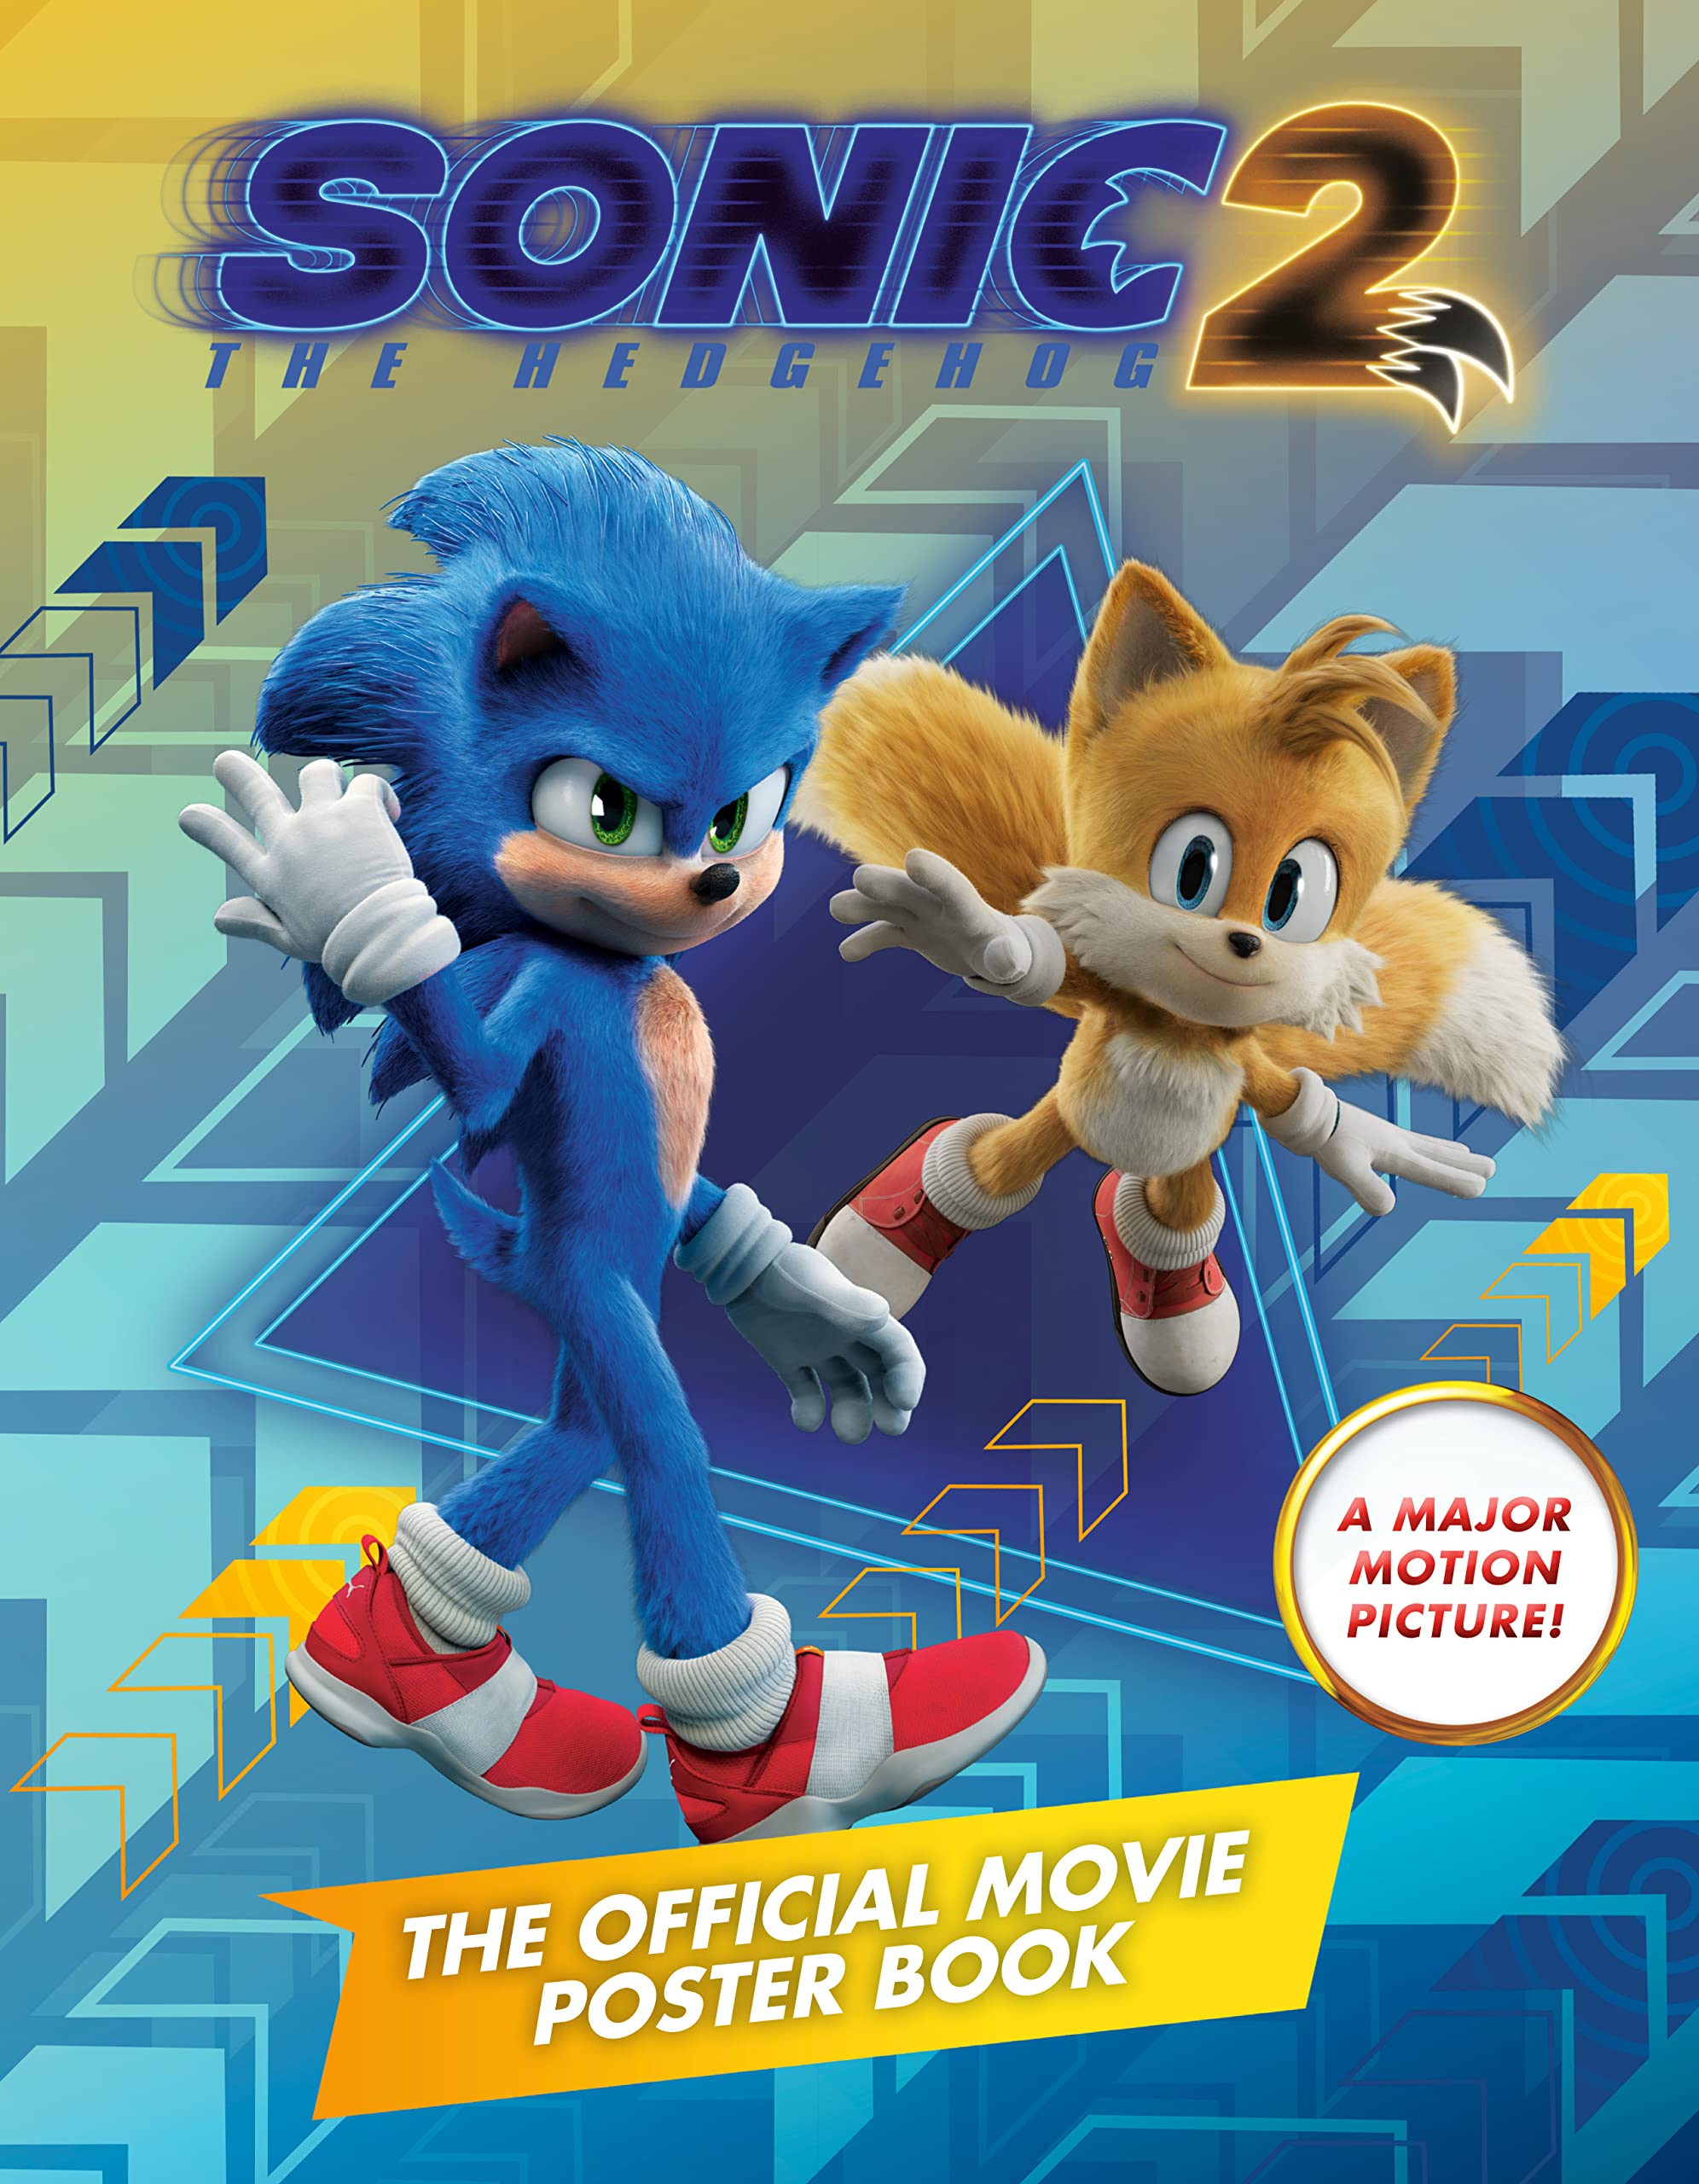 the Hedgehog 2 movie tie-in books are now available pre-order » SEGAbits - #1 Source for SEGA